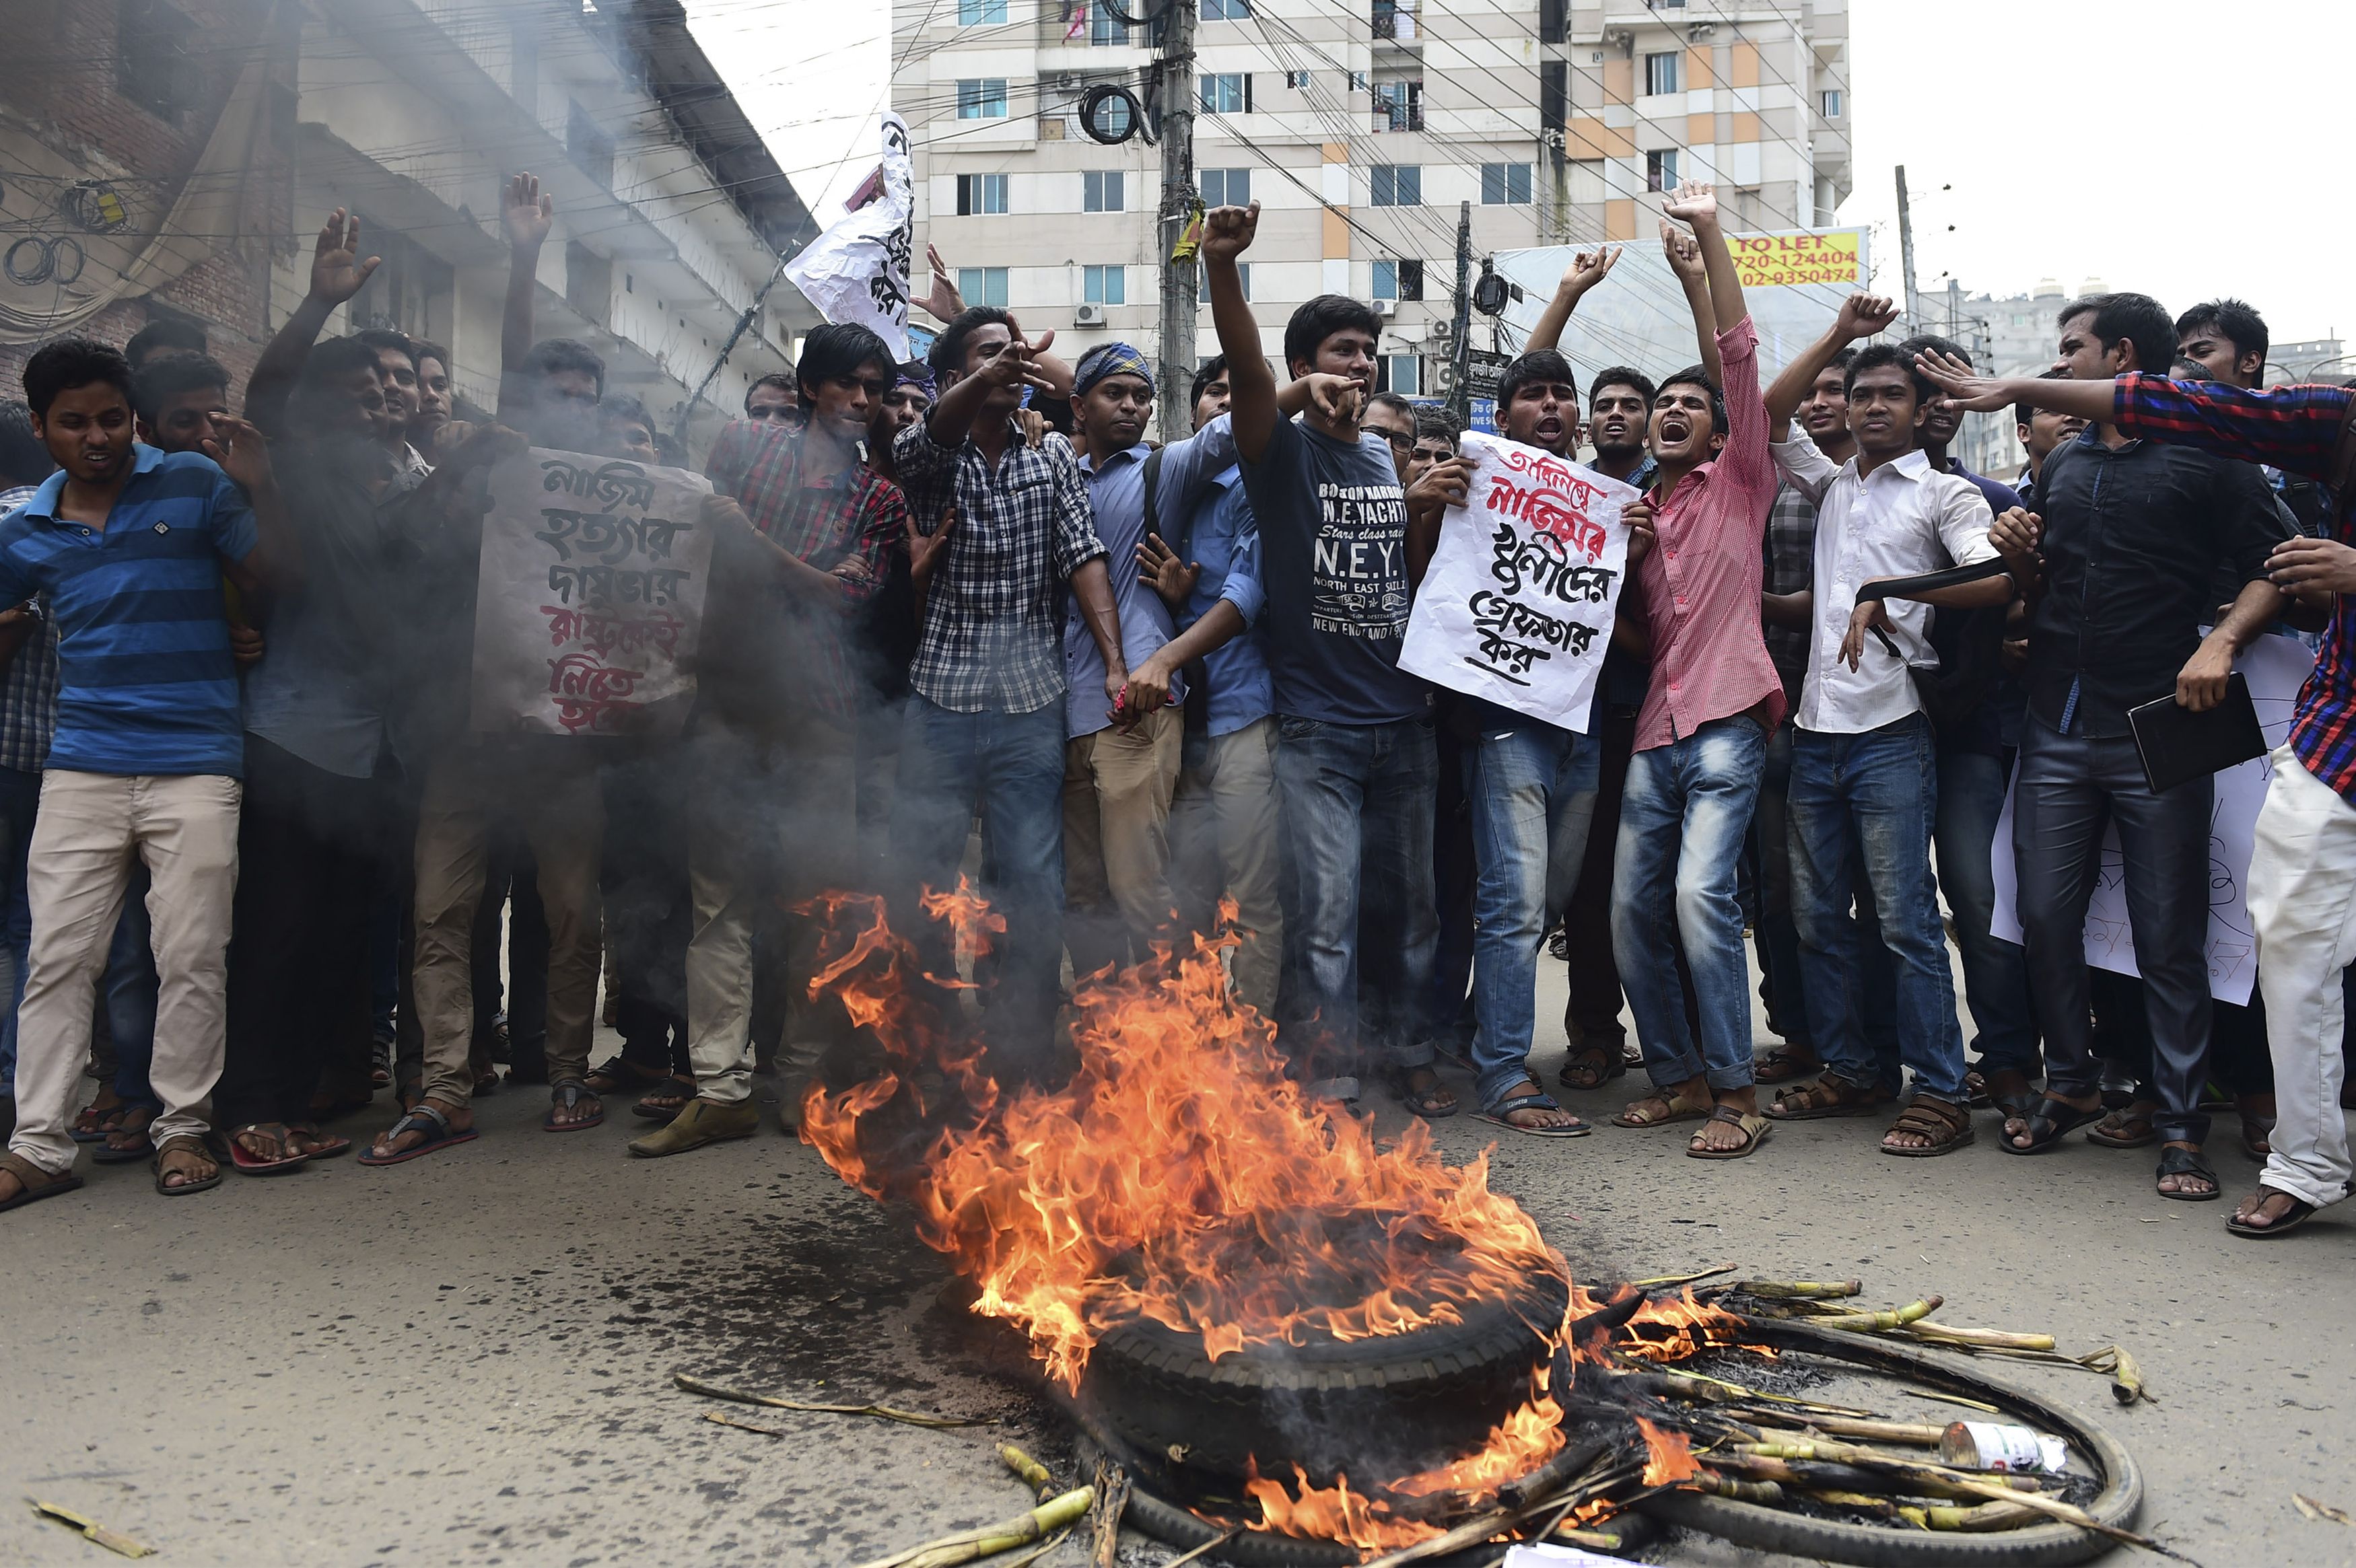 Bangladeshi students block the road and stage a protest following the murder of a law student who posted against Islamism on Facebook and was hacked to death by four assailants the night before, in Dhaka on April 7, 2016. (MUNIR UZ ZAMAN—AFP/Getty Images)